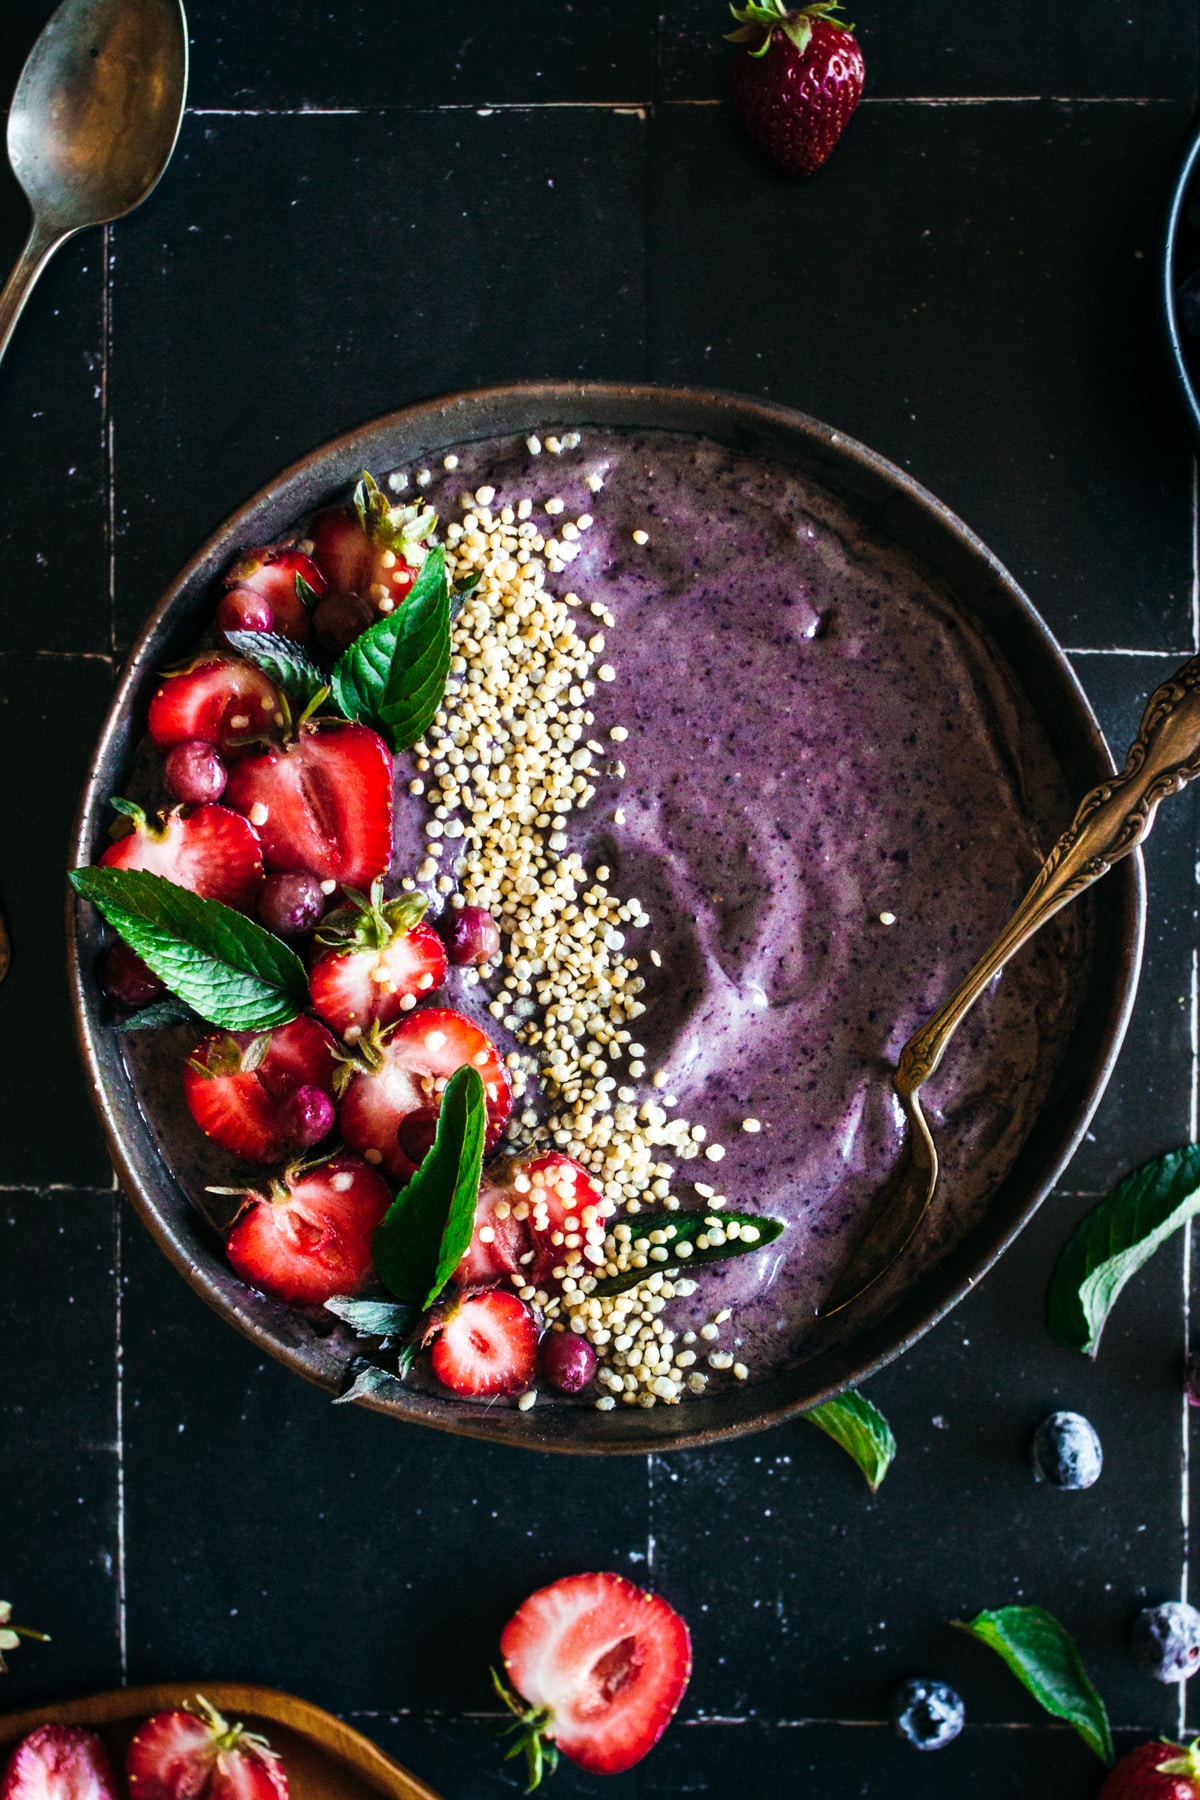 Up close blueberry smoothie bowl made with bananas, acai, and almond butter.